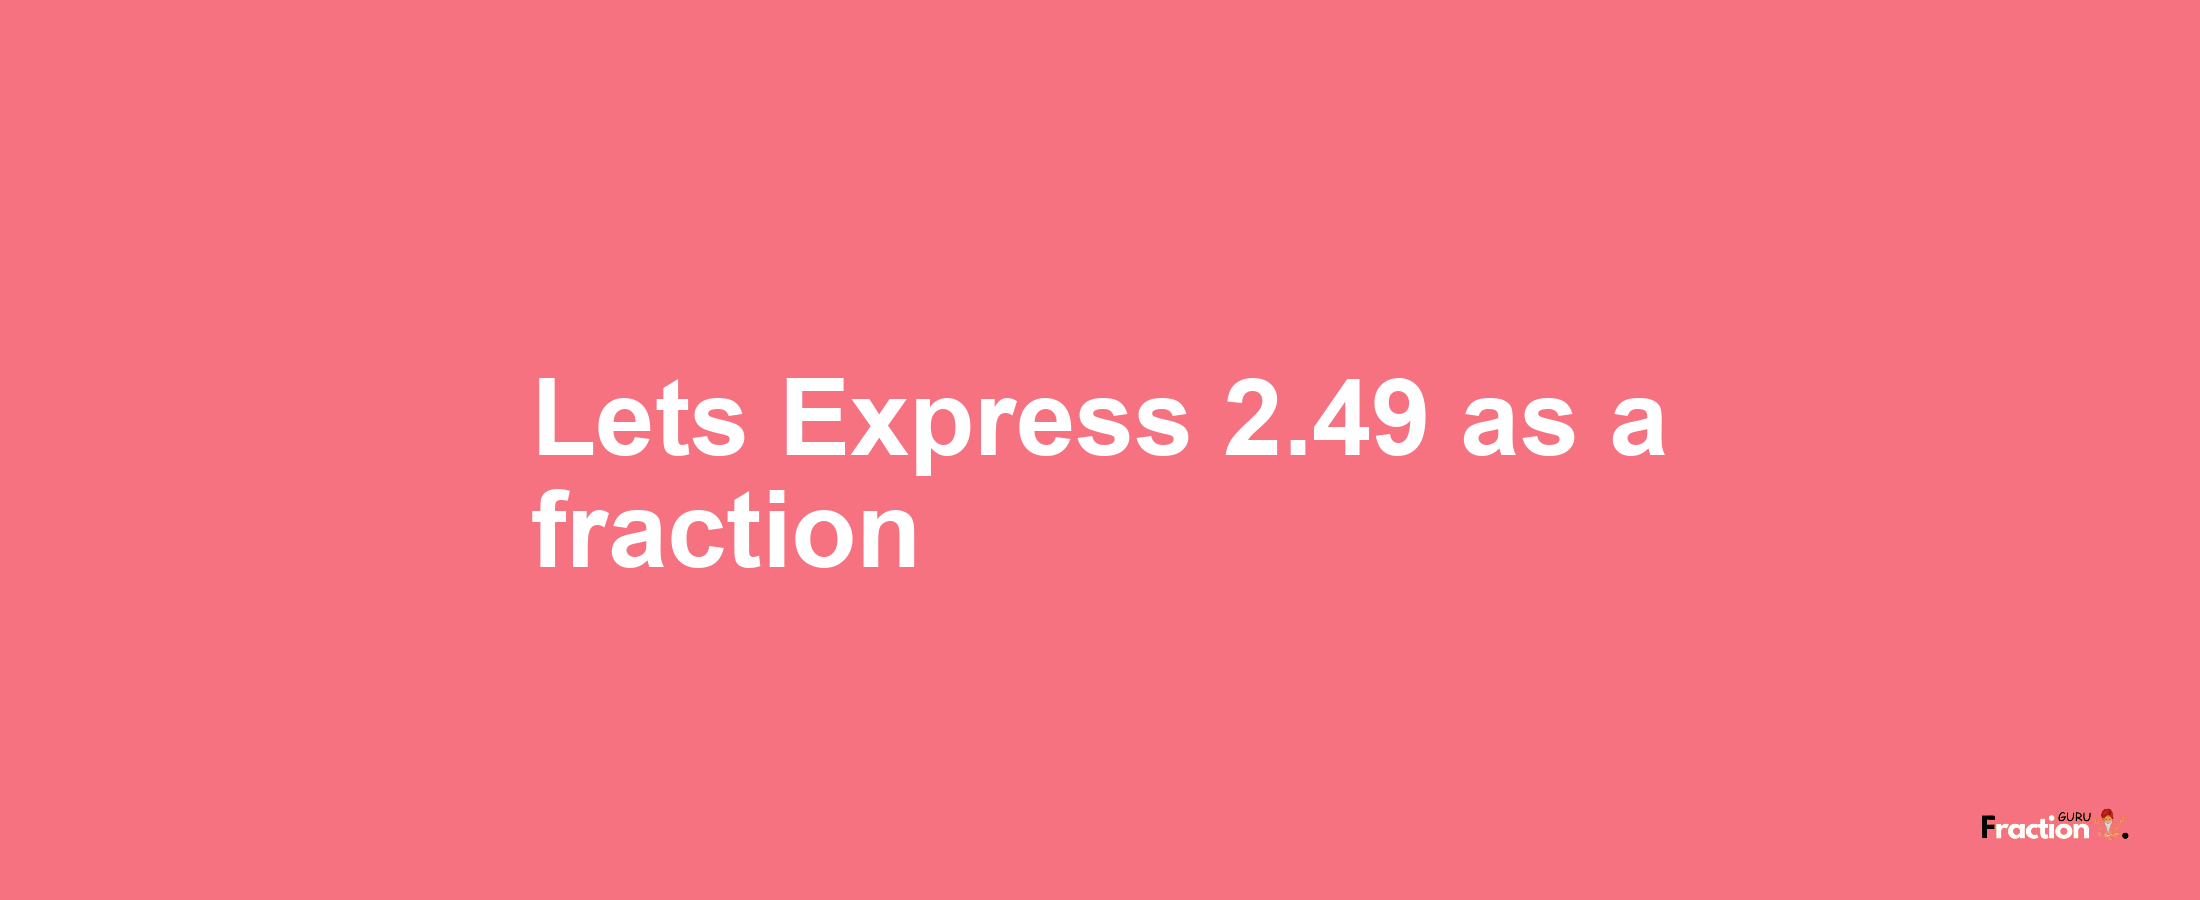 Lets Express 2.49 as afraction